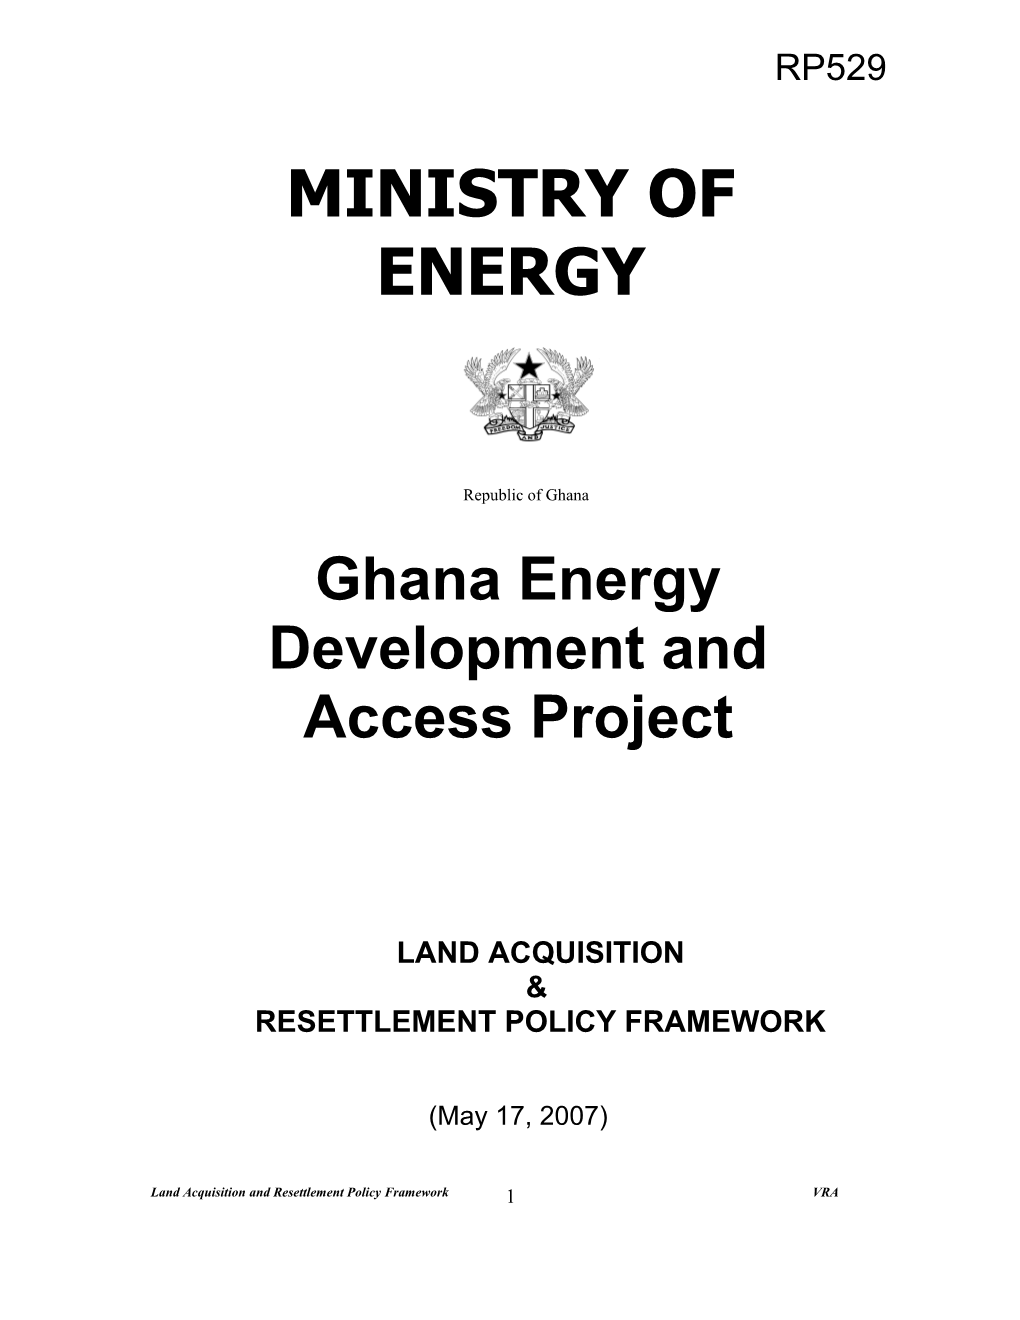 Ghana Energy Development and Access Project